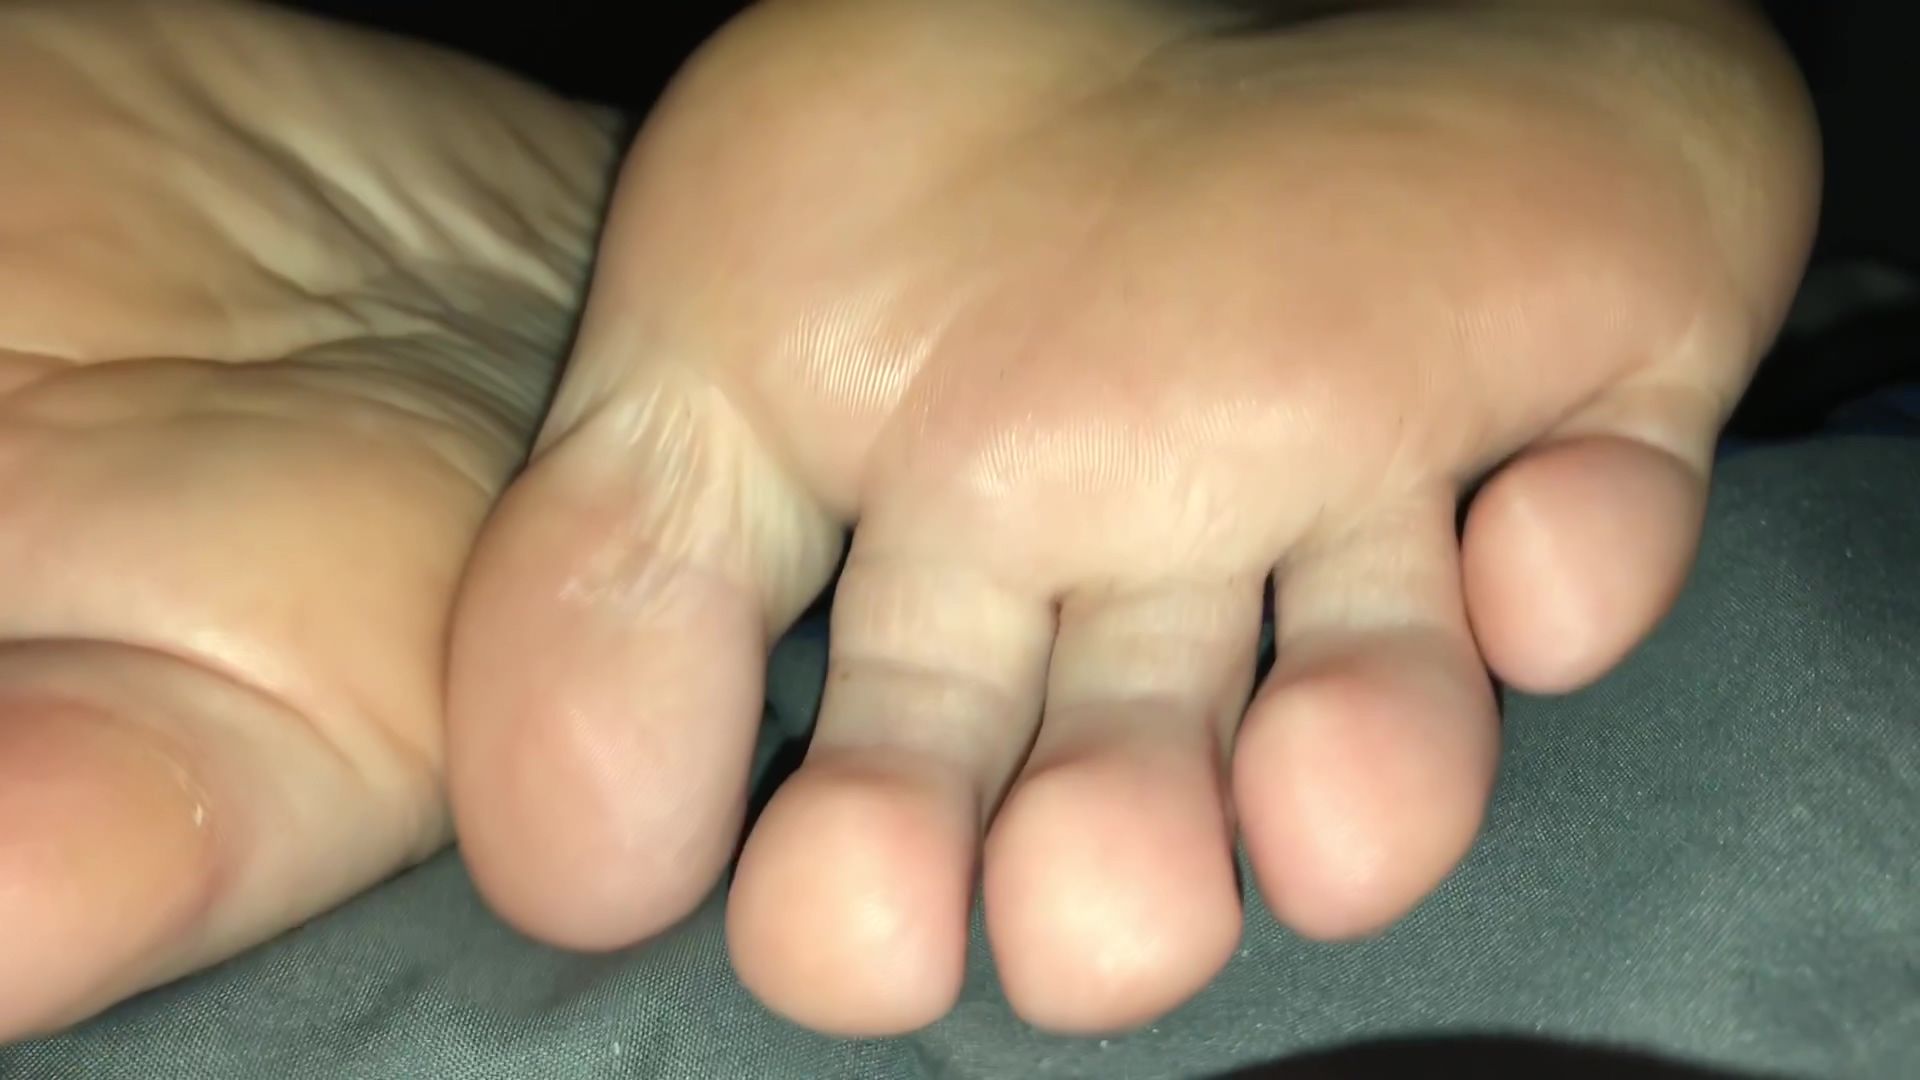 Myfreecams Saras Sweaty And Smelly Soles After Work Real Sex - 1